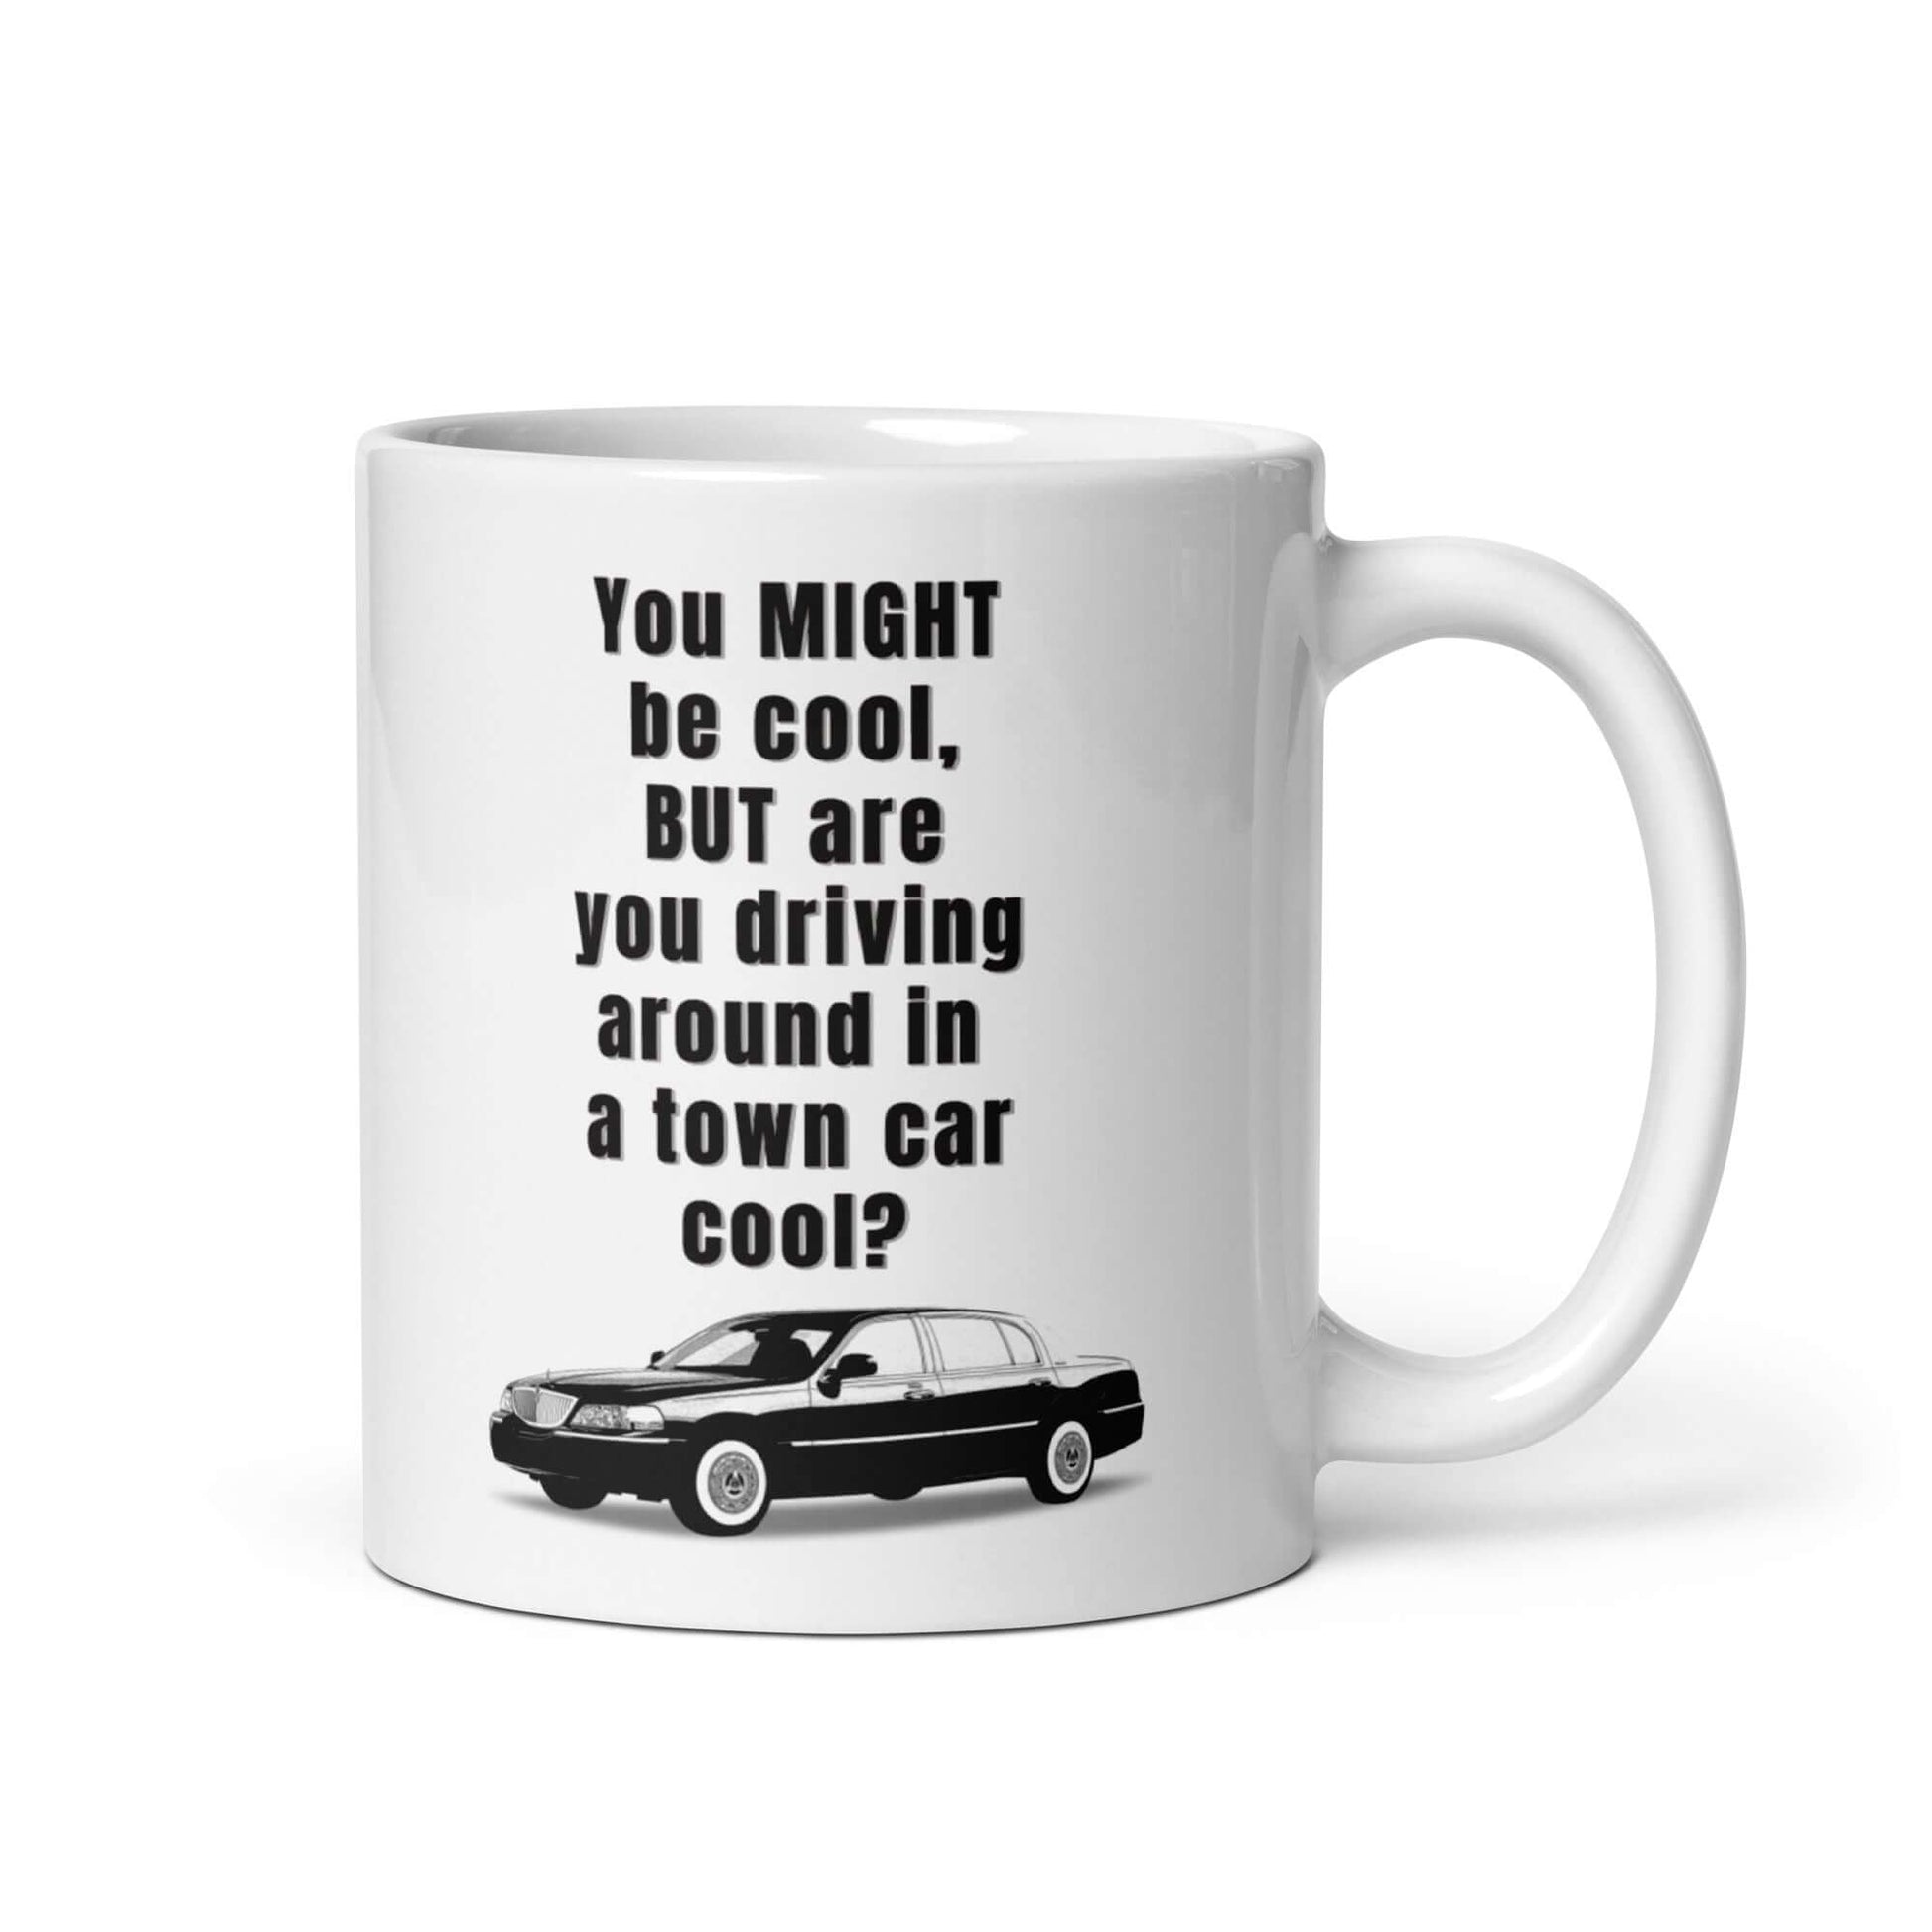 You MIGHT be cool, but are you driving around in a town car cool - White glossy mug 90's car car classic car ford ford panther gas car gasoline car large car Lincoln Car Lincoln TOwn Car Muscle Car Panther Panther Mafia Panther Mobile panther platform Sports car Street Car Town Car Vintage Car